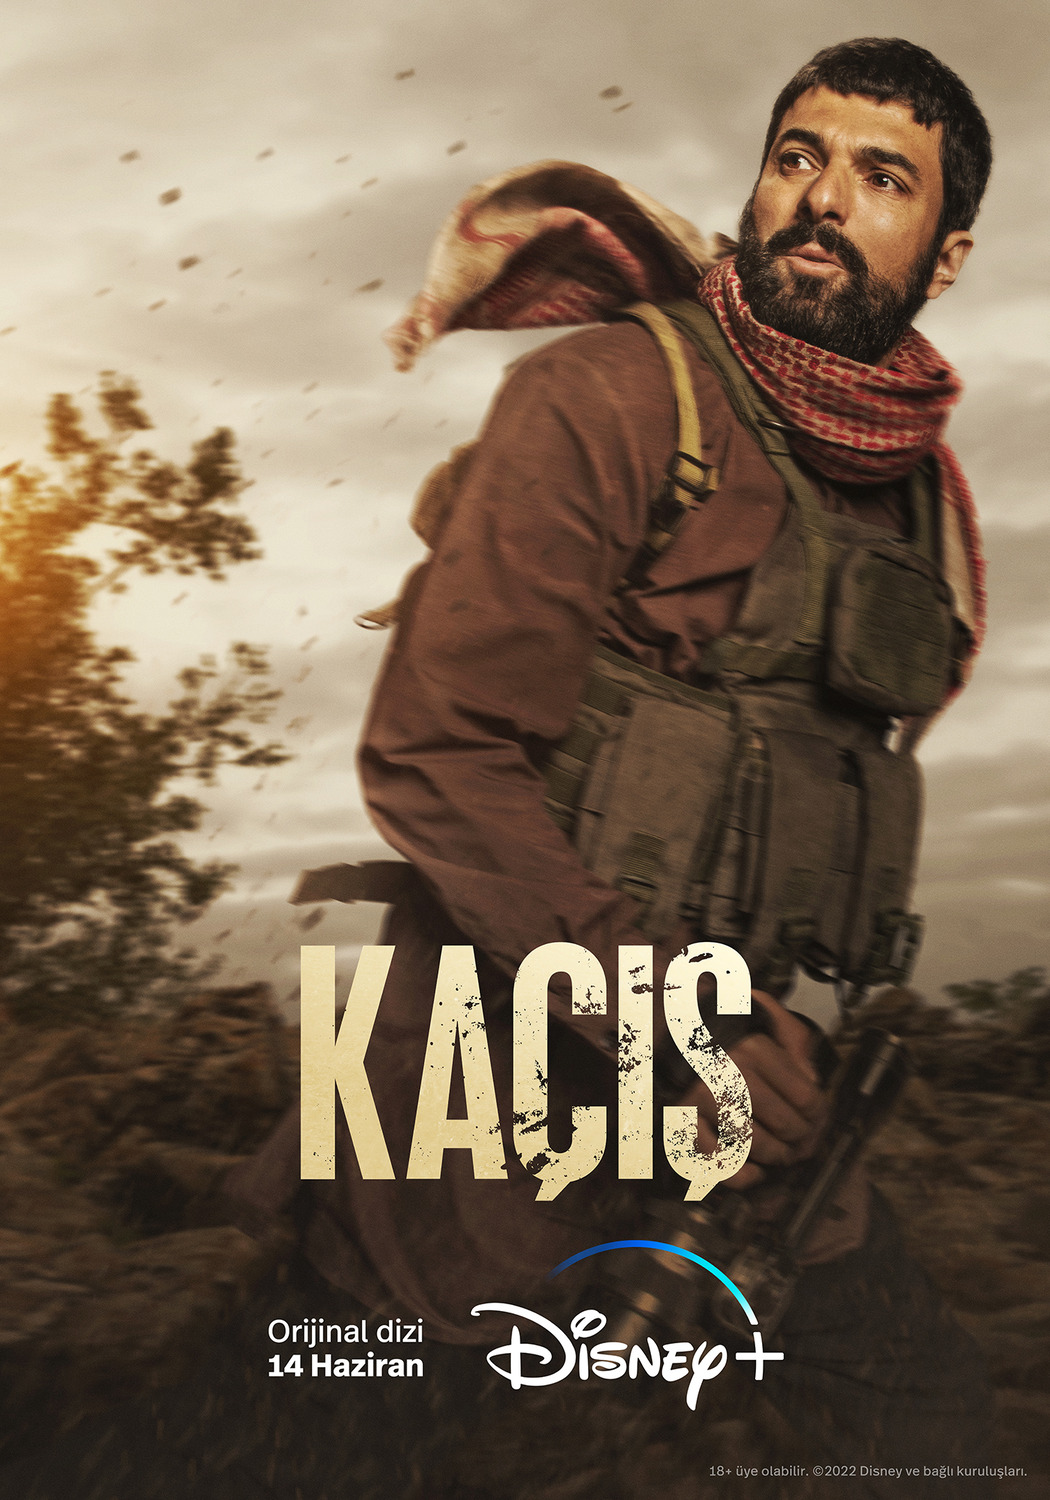 Extra Large TV Poster Image for Kaçis (#5 of 14)